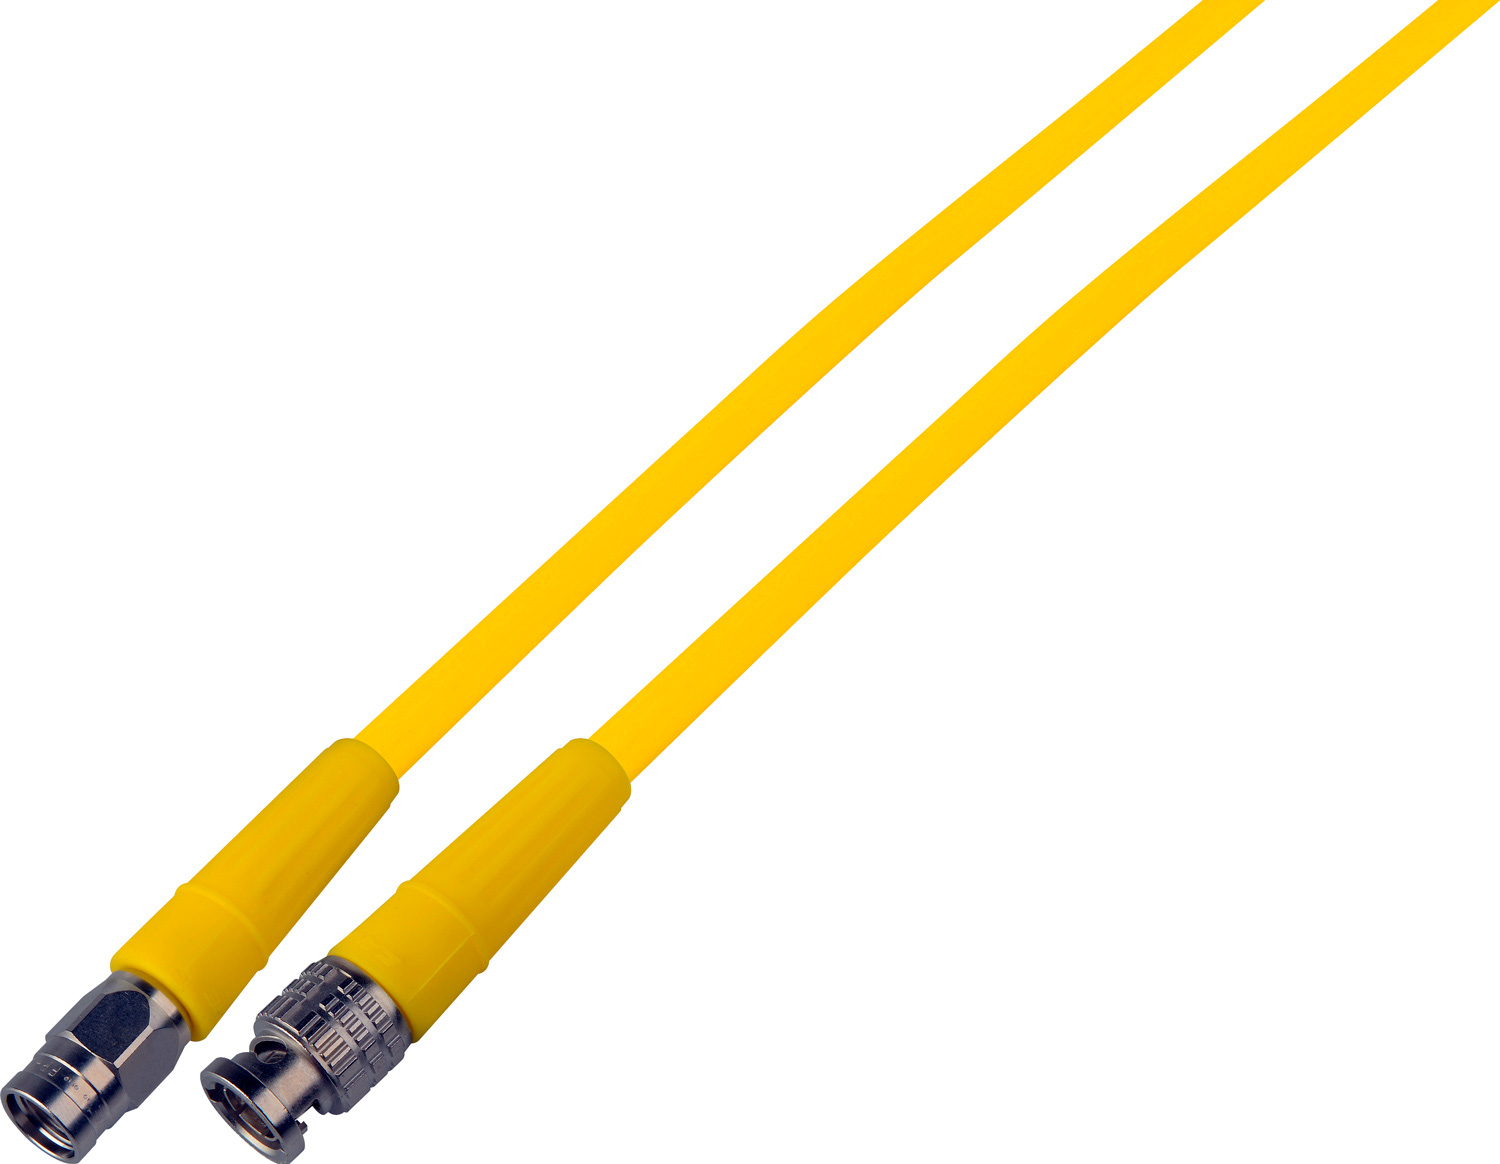 Laird SD6-B-F-3 YW HD-SDI Premium BNC Male to F Male Video Cable - 3 Foot Yellow